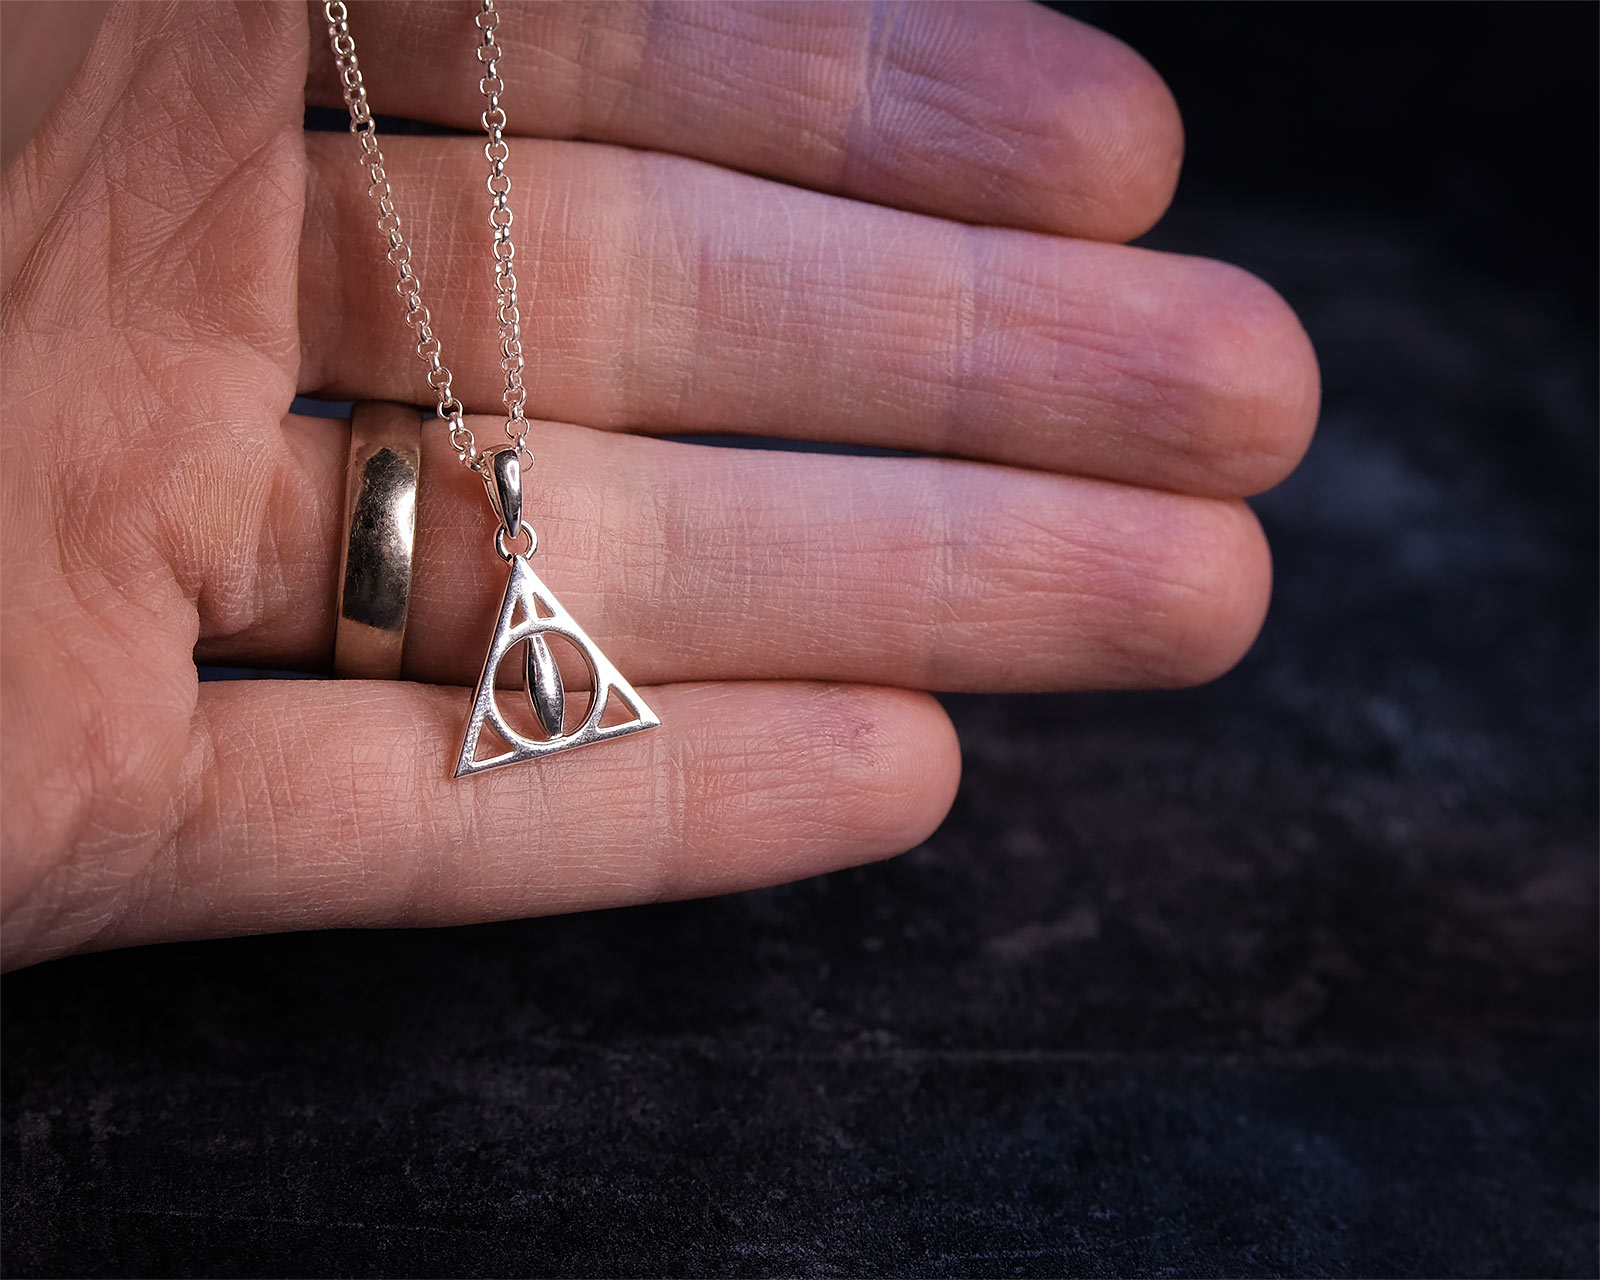 Buy Harry Potter Jewelry, Deathly Hallows Necklace, Gemstone Jewelry,  Destiny Pendant Necklace Online in India - Etsy